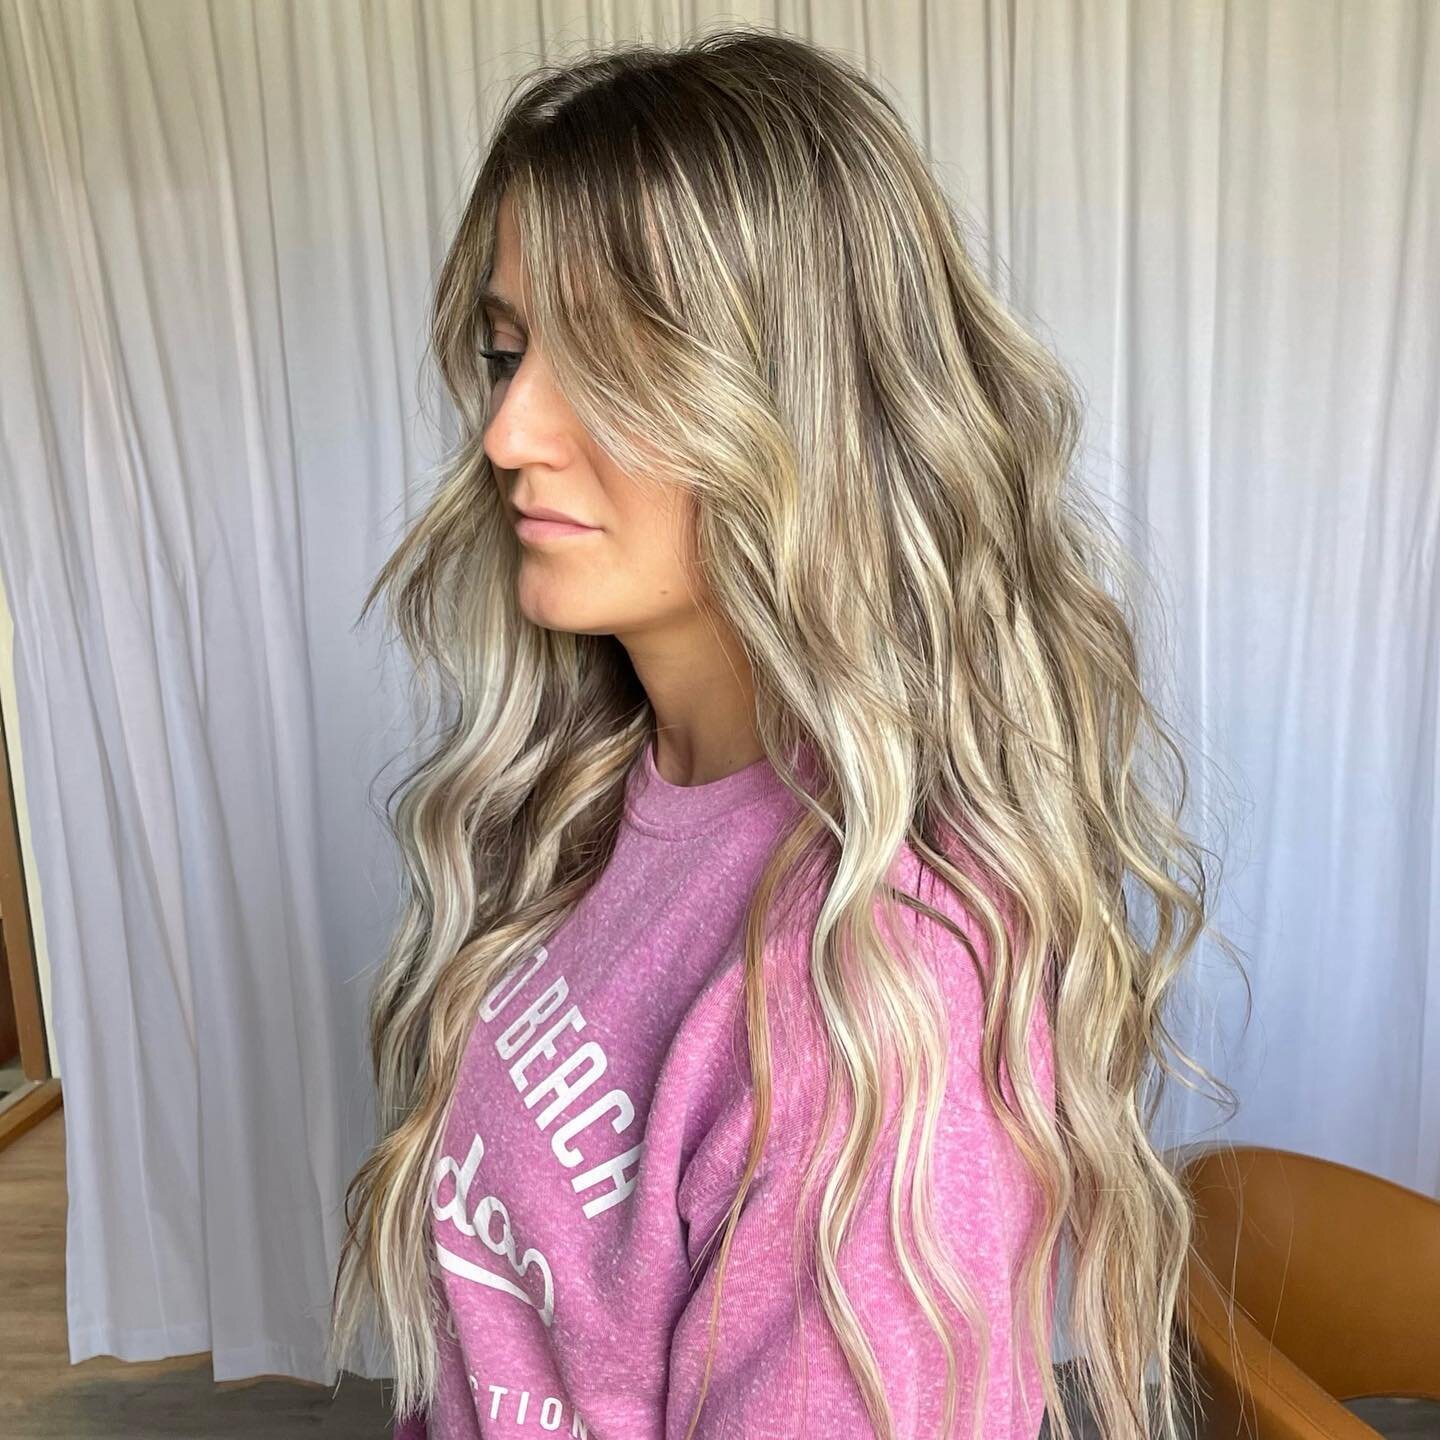 SWIPE TO SEE THE INSTALL

2 Rows or Gorgeous @covetandmane extensions in Bondi 
(Used 18&rdquo; on the bottom row and 22&rdquo; on the top row for a length and thickness)

#handtiedhairextensions
 #barringtonhair #luxuryhair #extensionbeforeandafter 